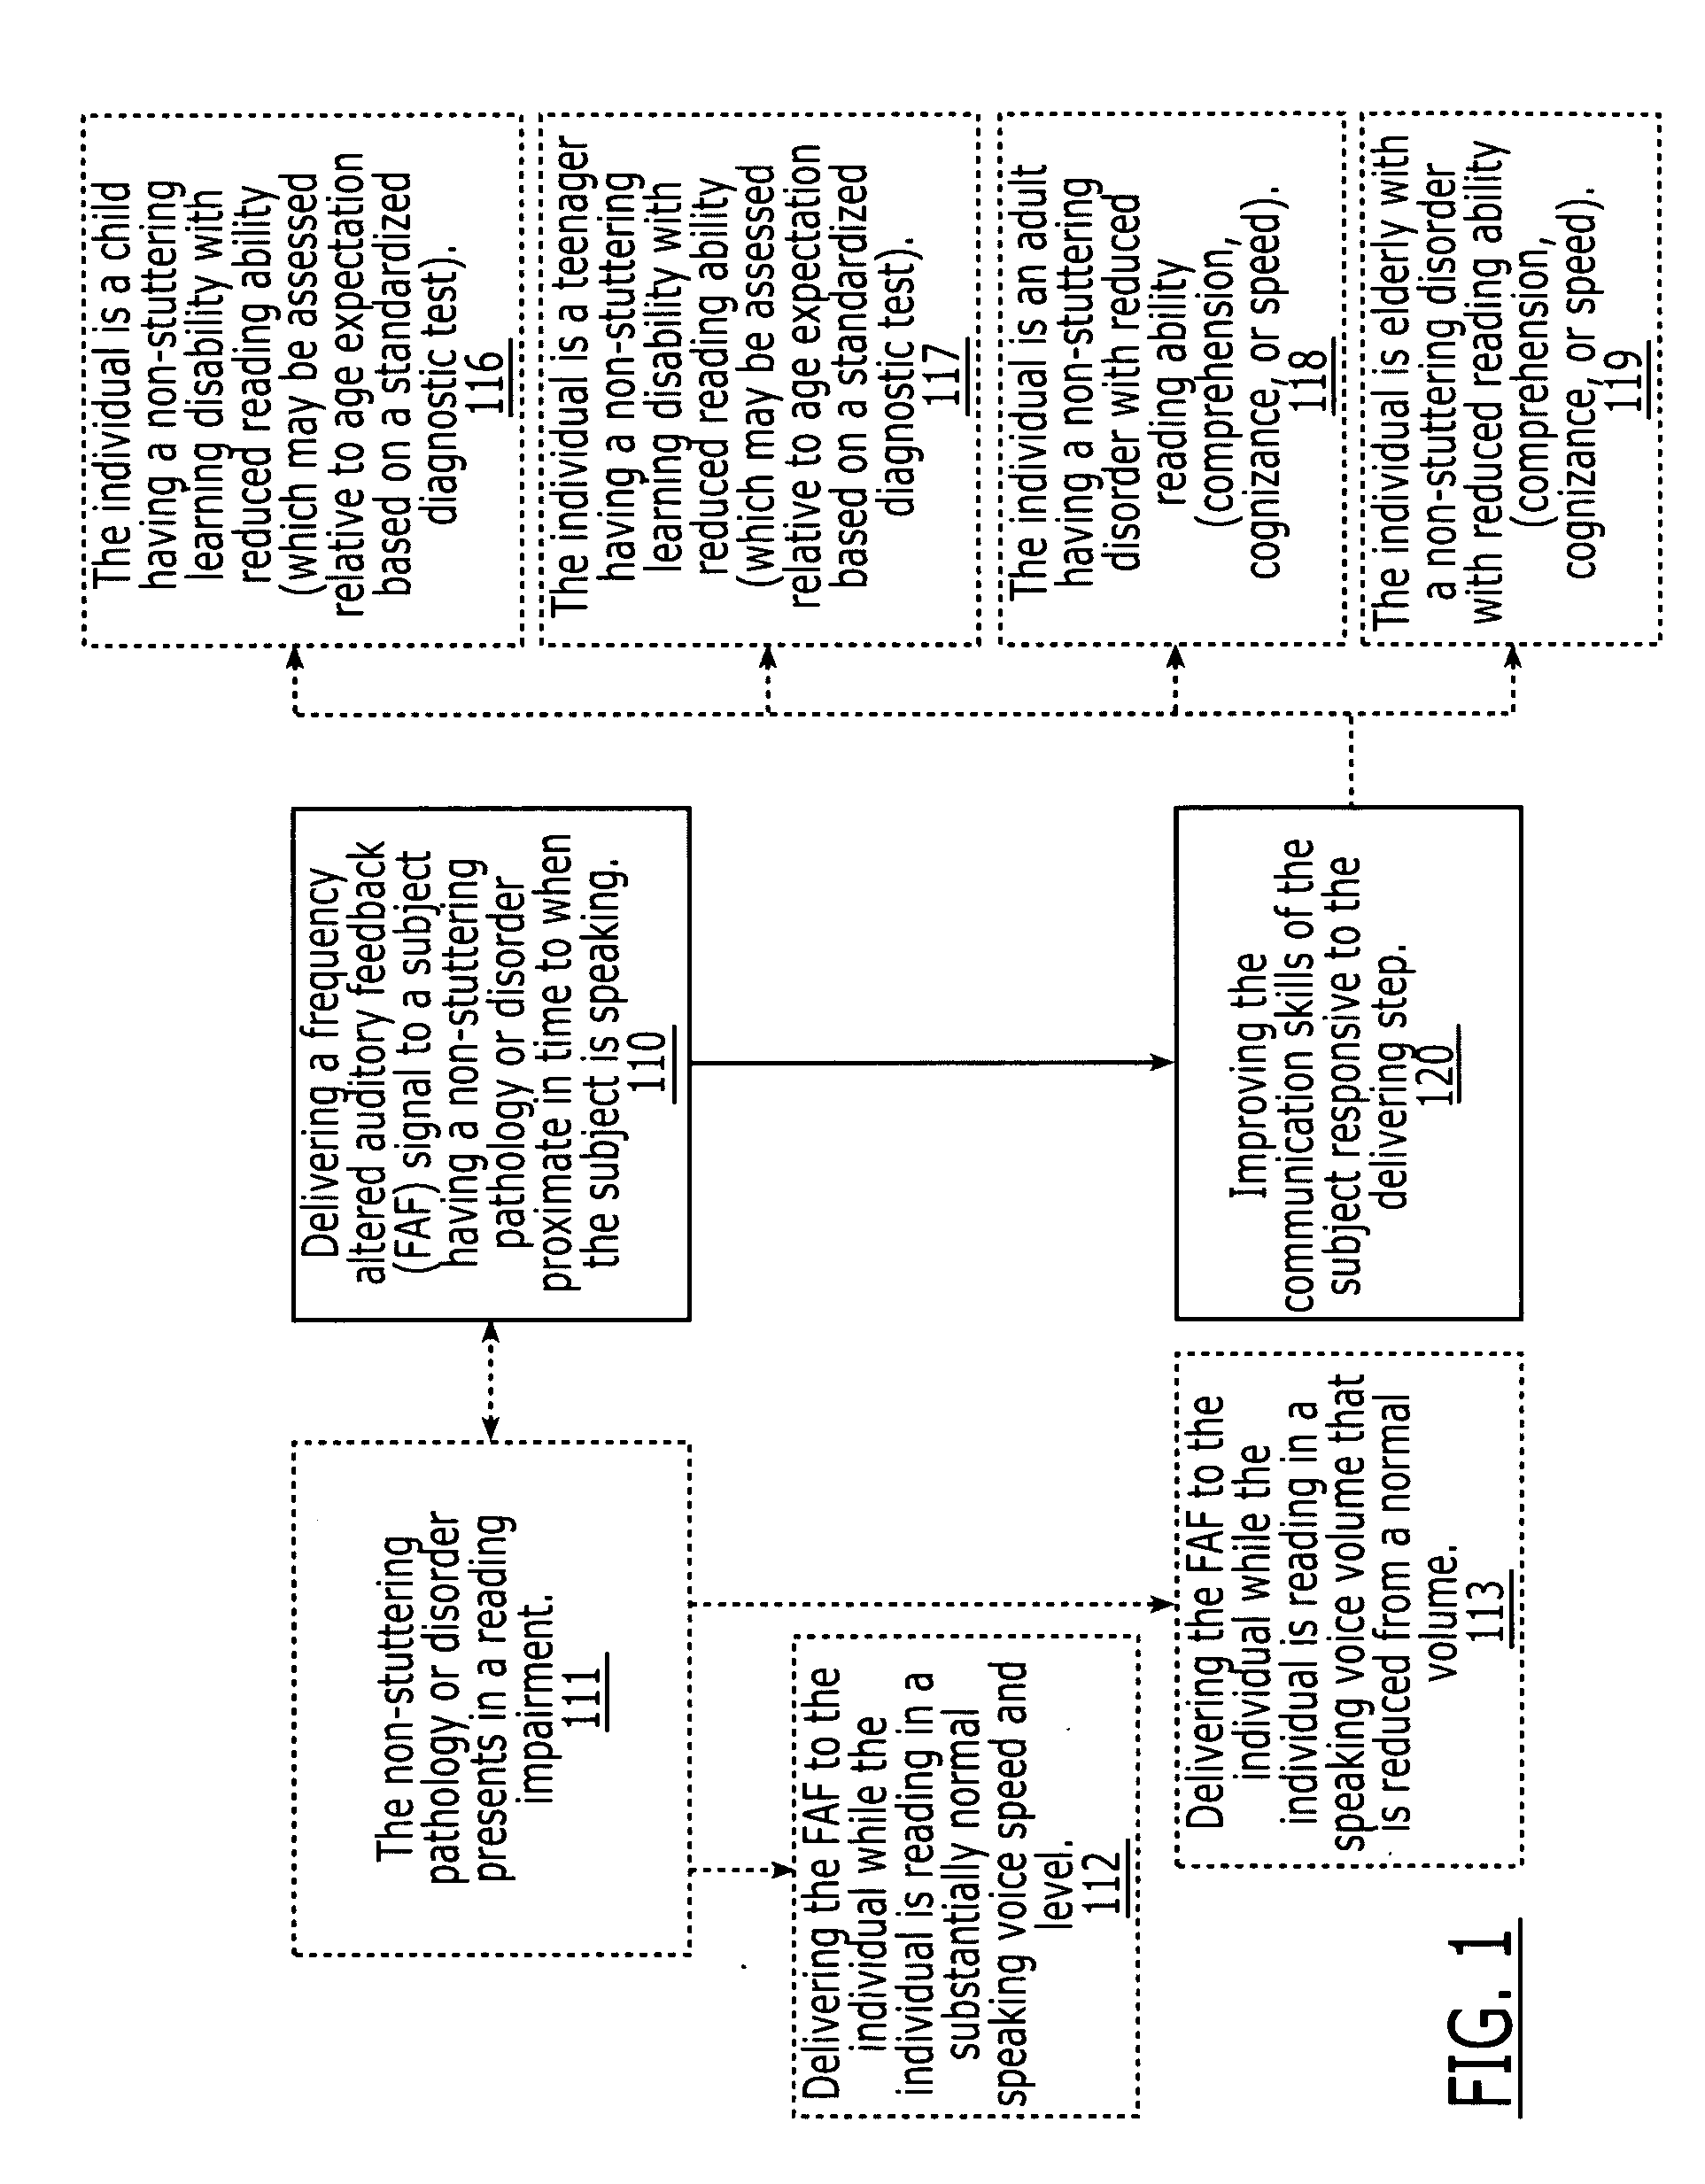 Methods and devices for treating non-stuttering pathologies using frequency altered feedback